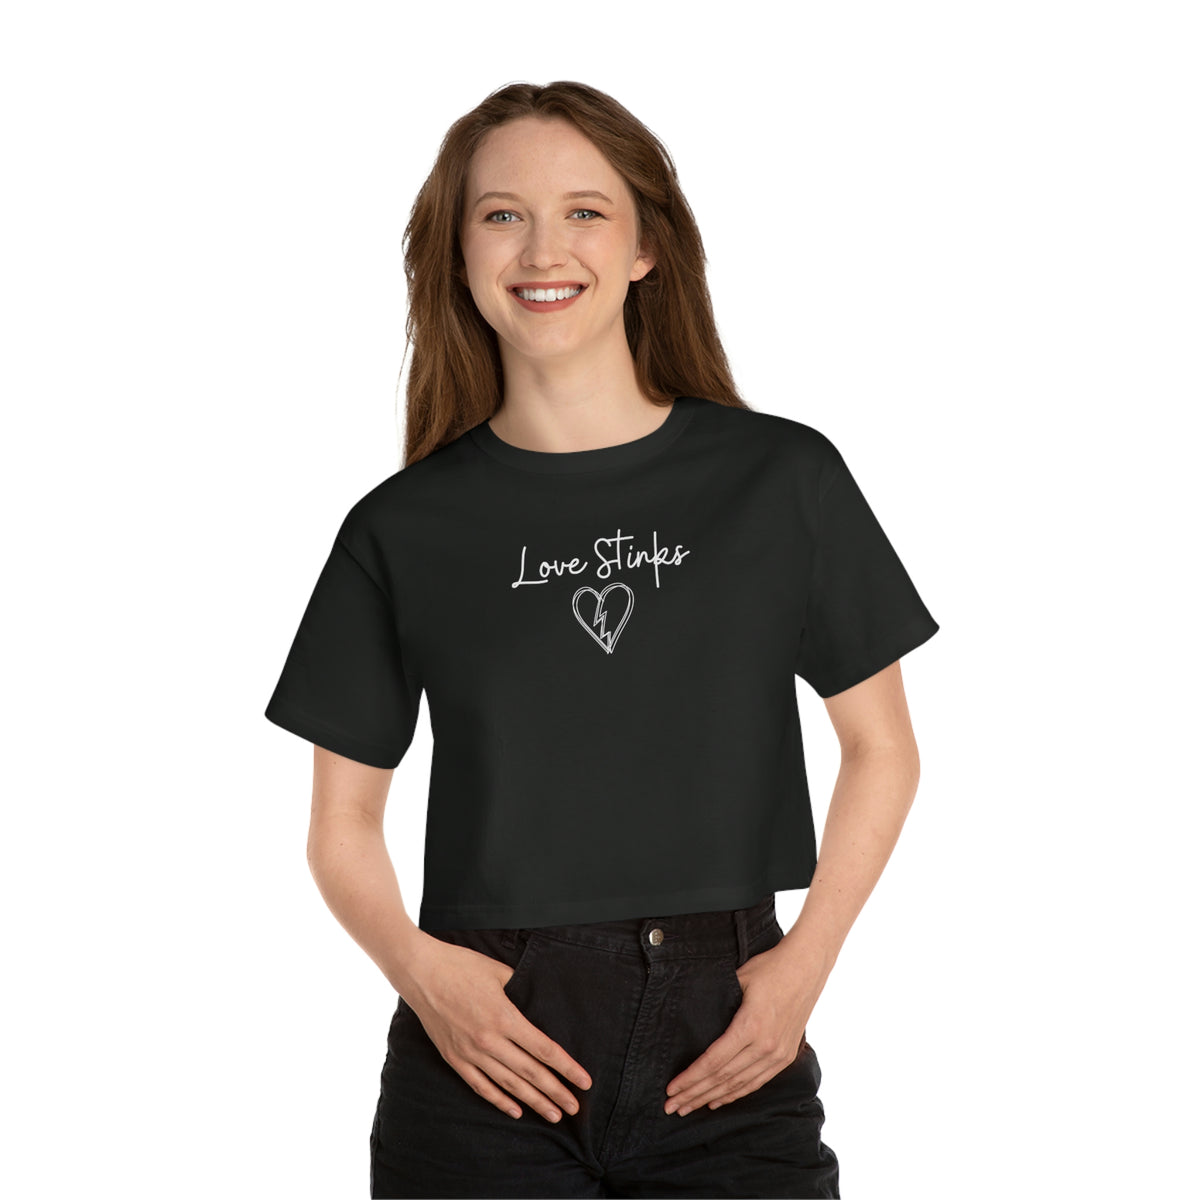 publish love stinks cropped tee